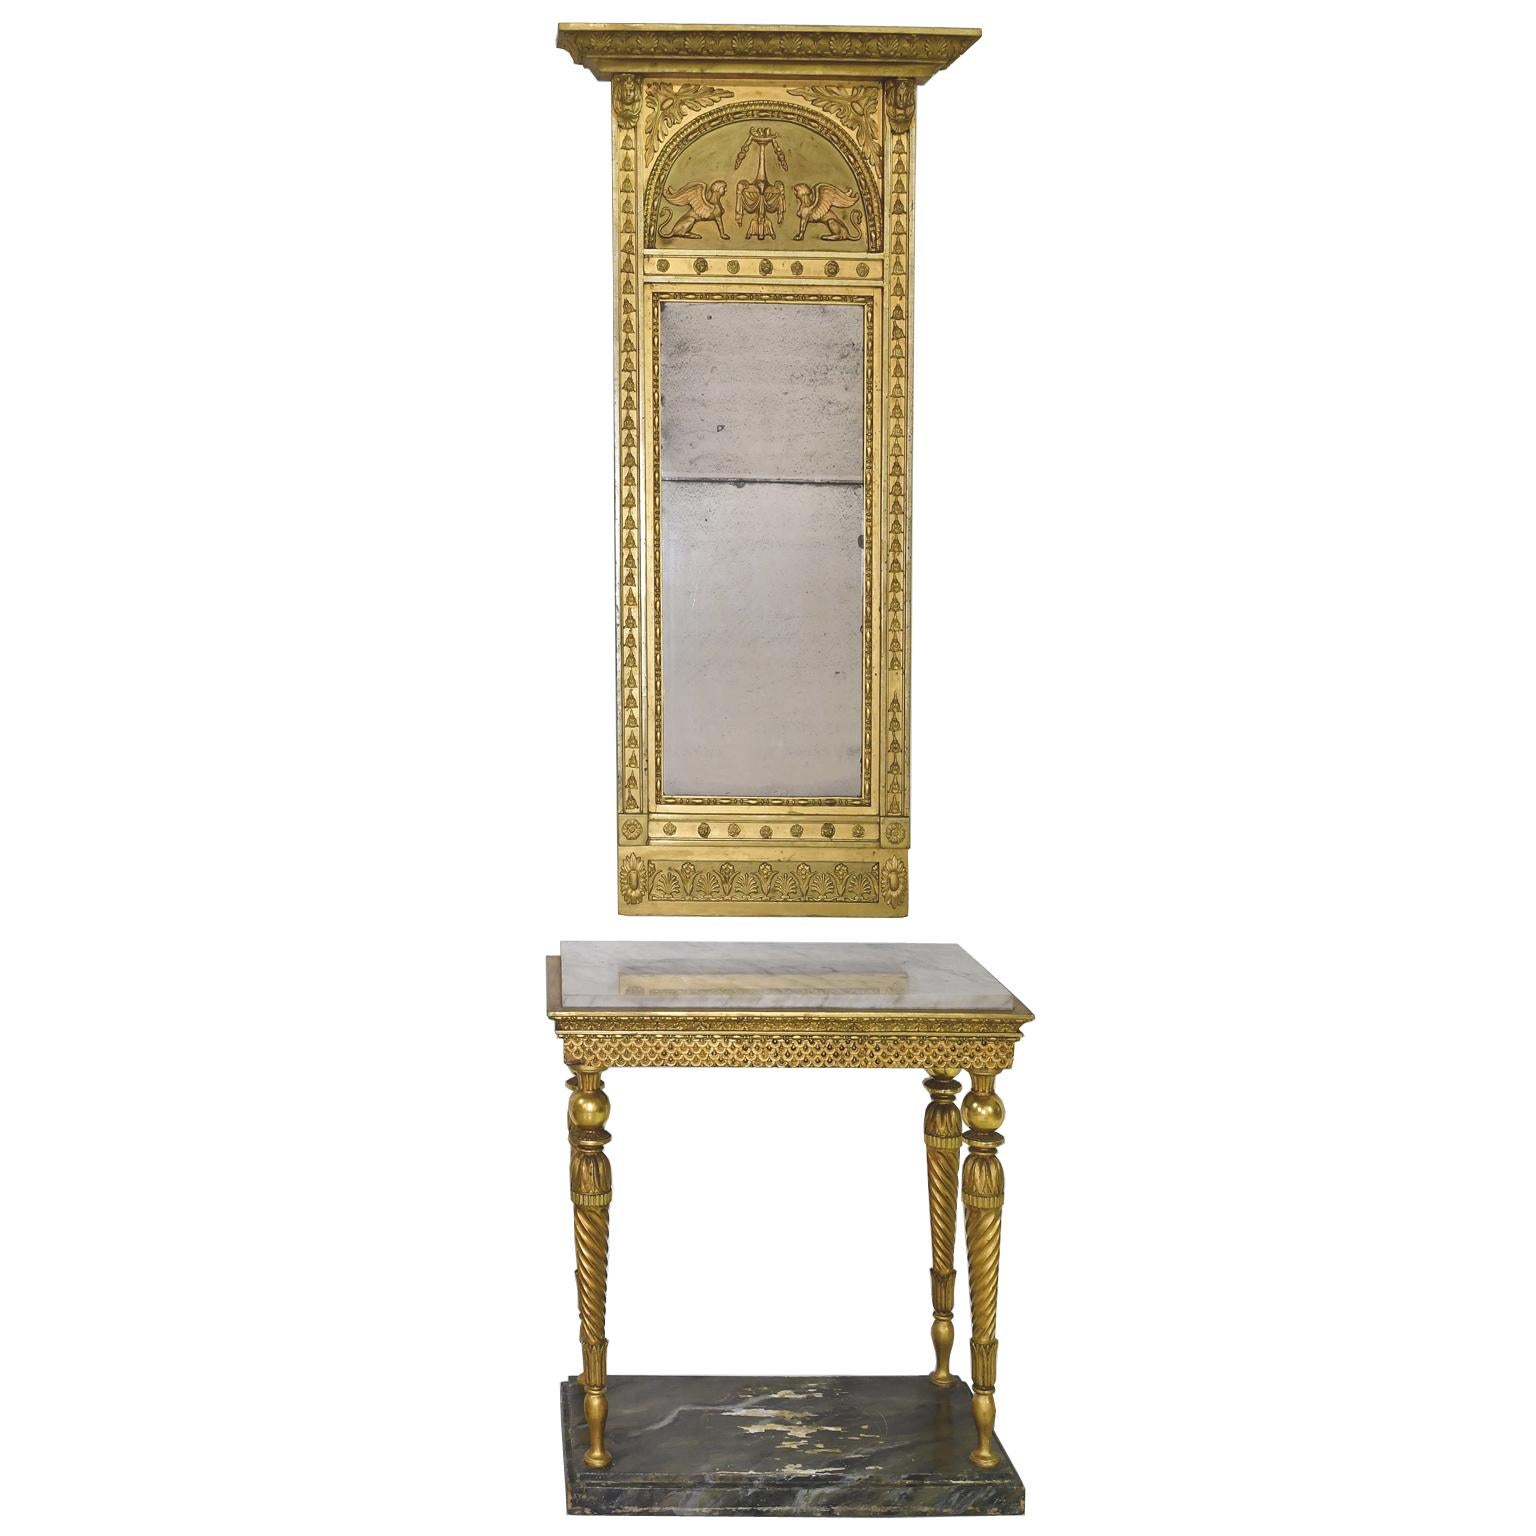 An early French Empire giltwood mirror decorated with the neoclassical motifs adopted during Napoleon's reign as French Emperor (1804-1814) and inspired by archaeological finds during his Egyptian Campaign. The cornice displays a row of palmettes